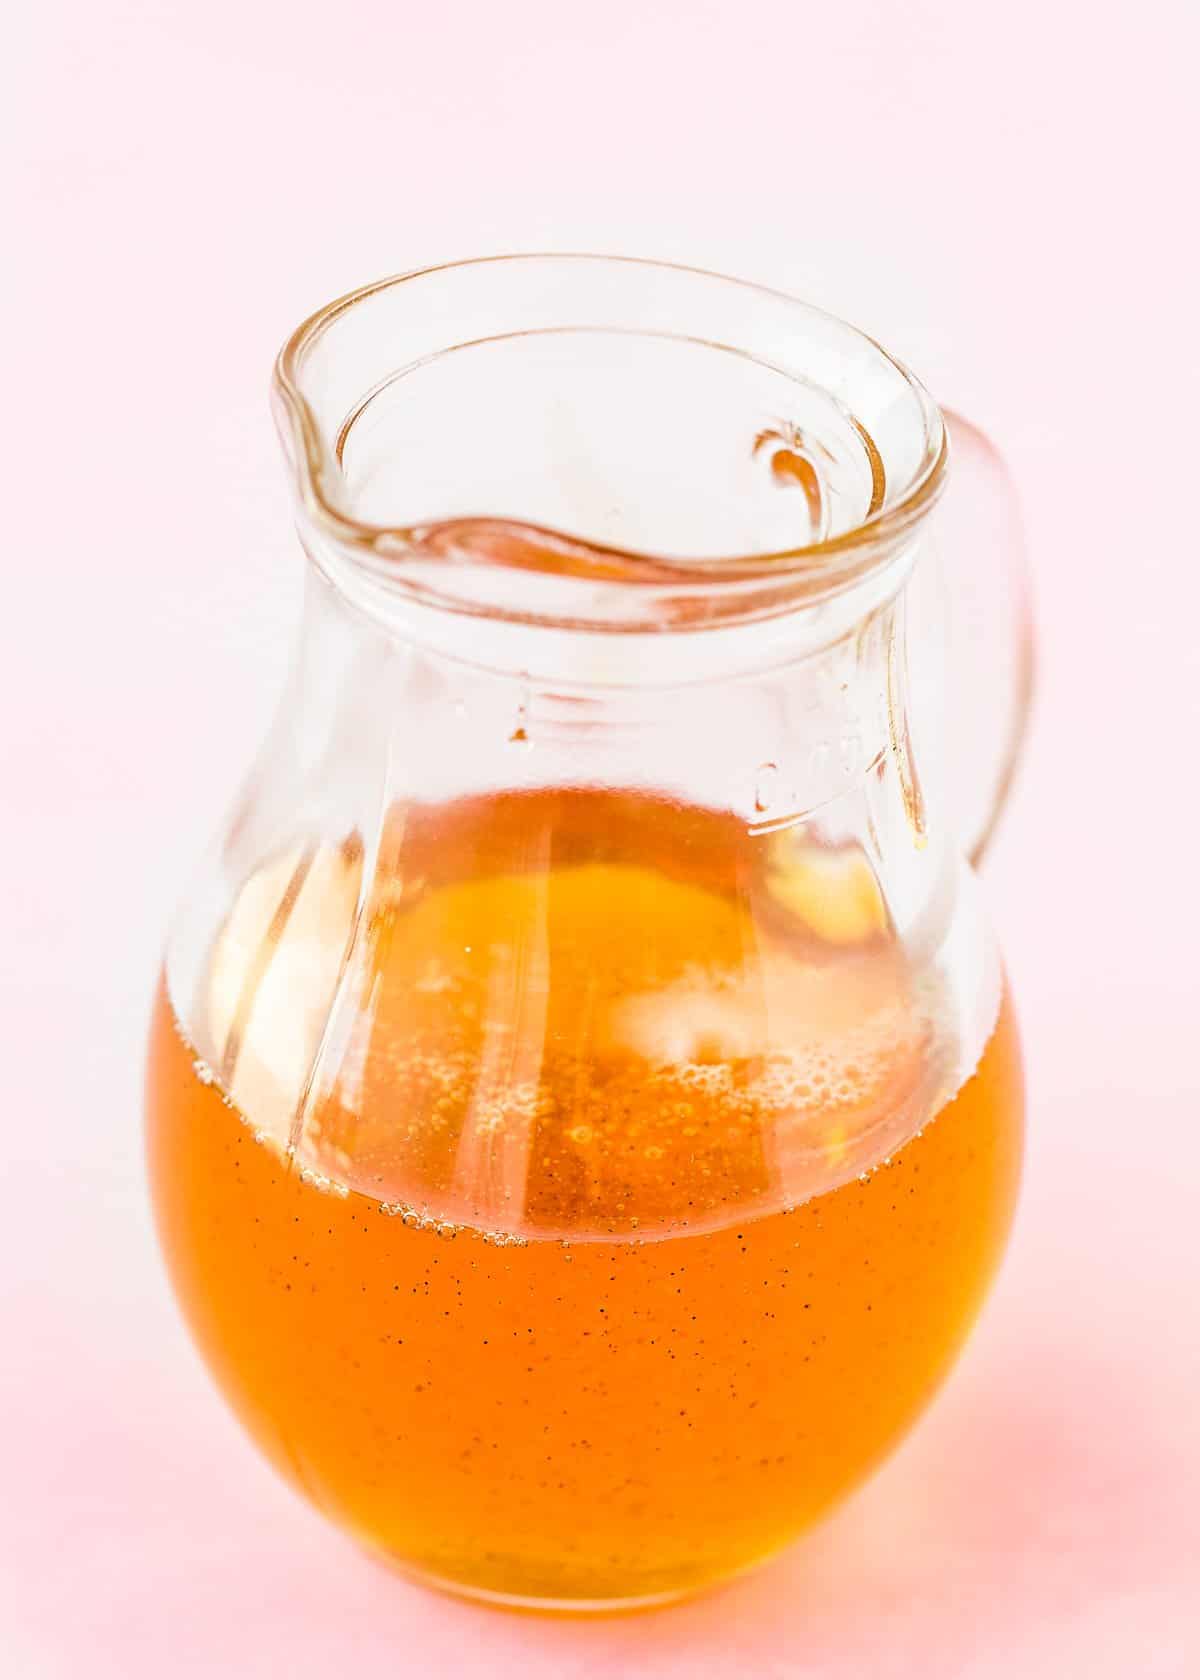 caramel sauce in a glass container.